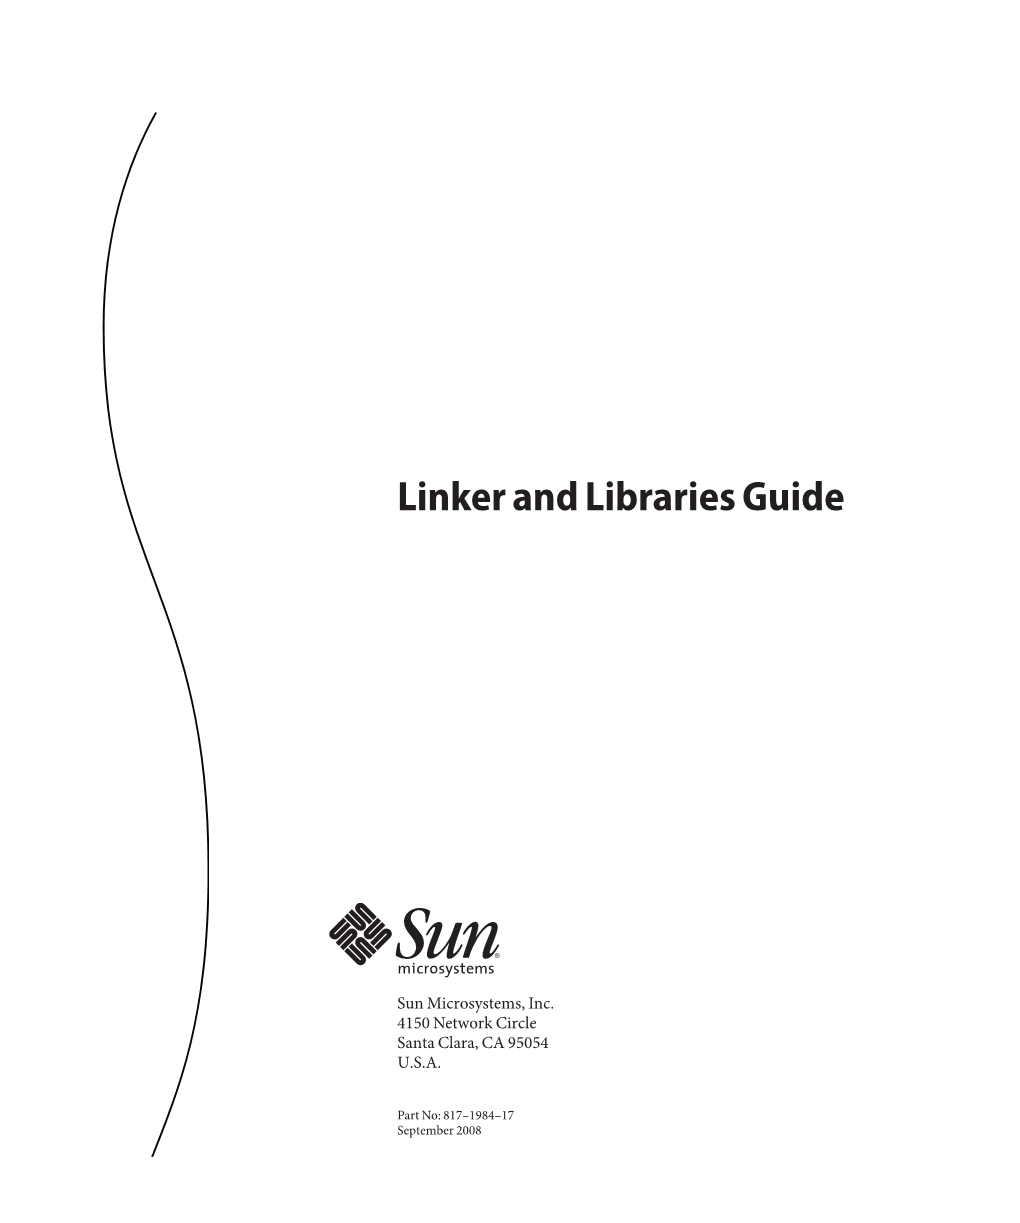 Linker and Libraries Guide